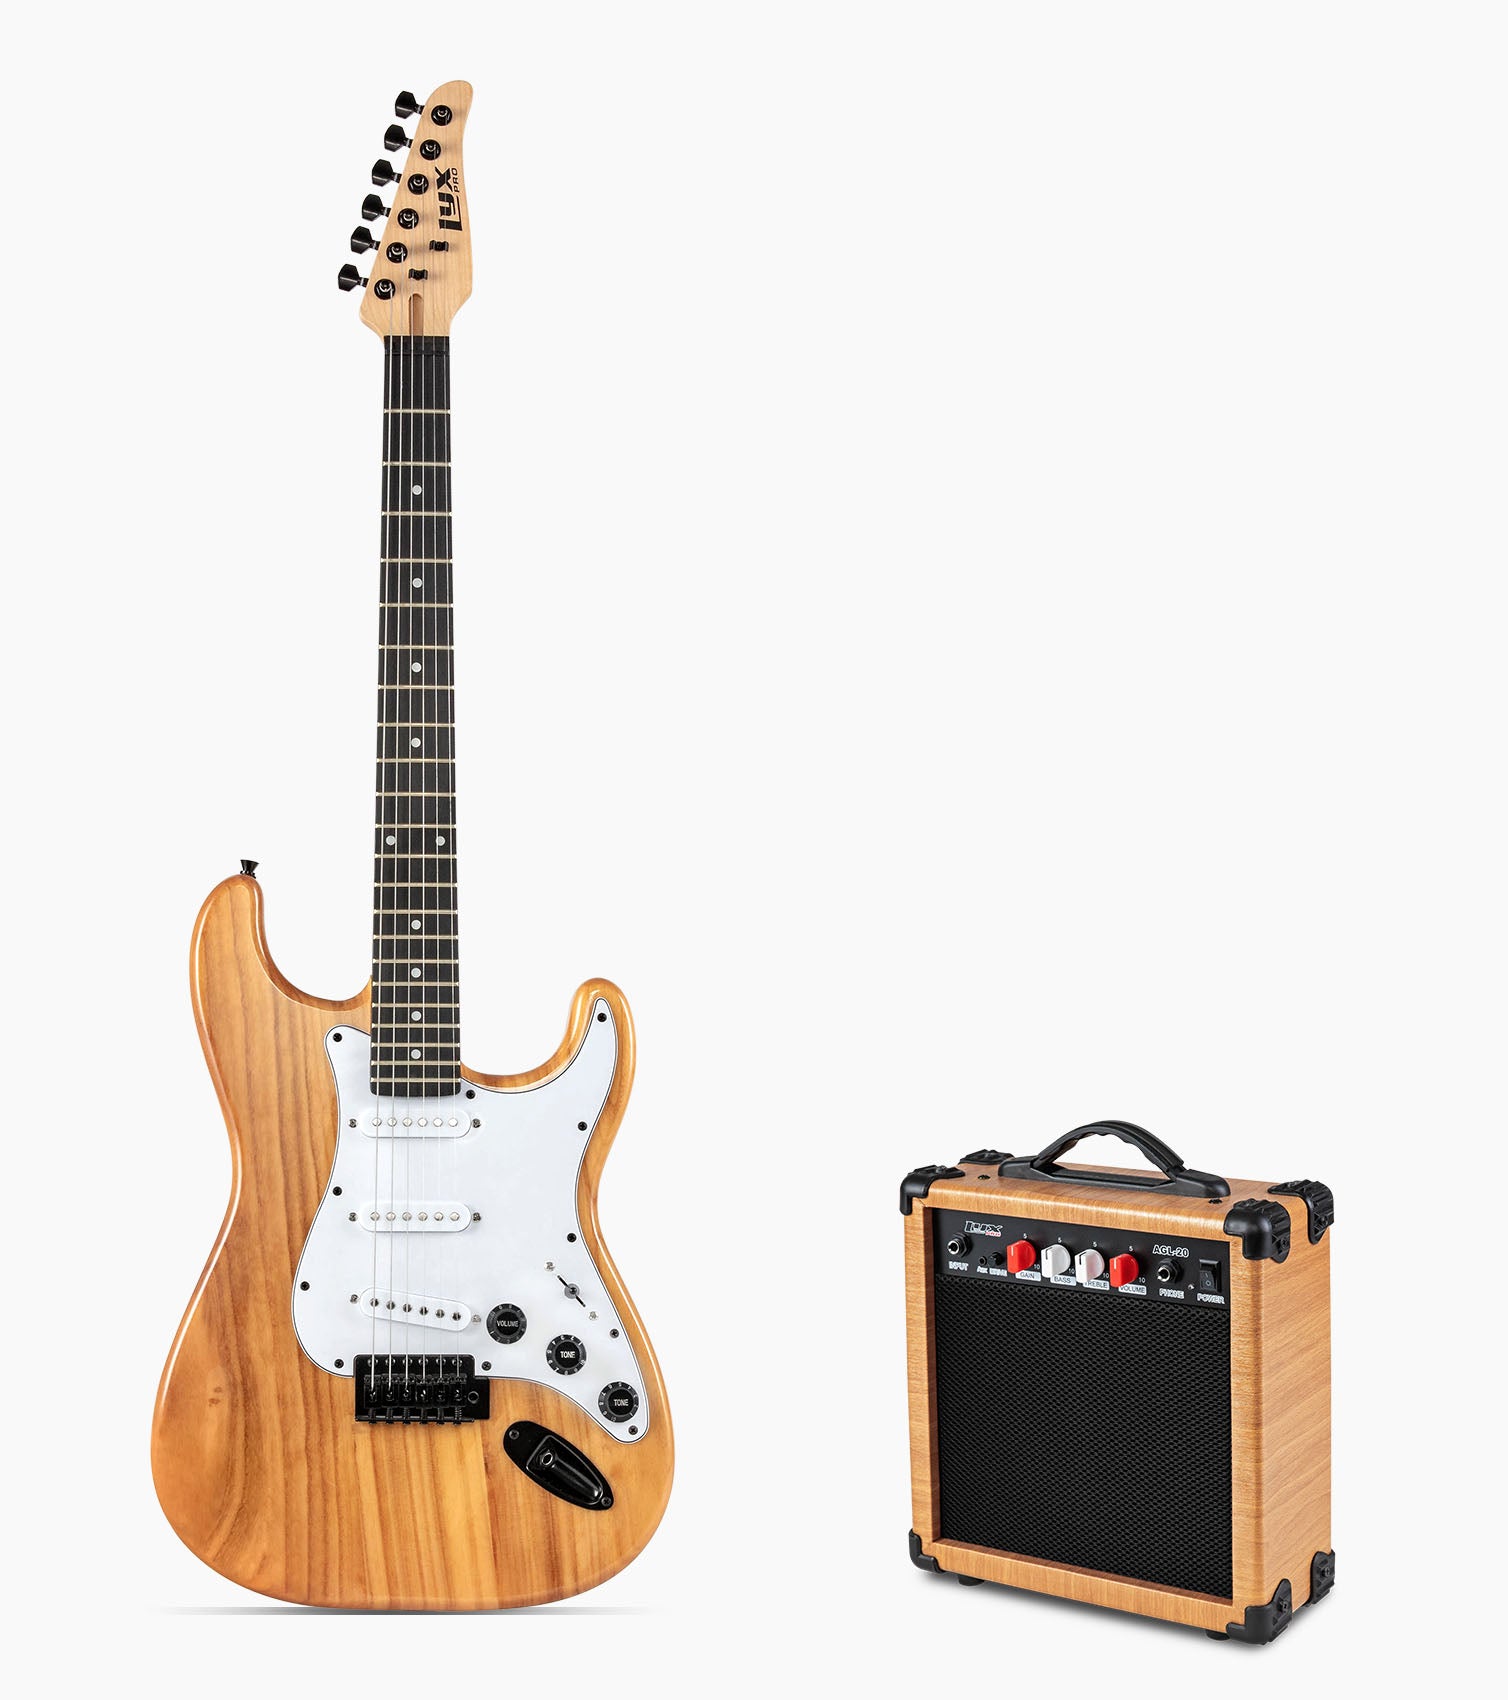 39” Natural beginner electric guitar with amp